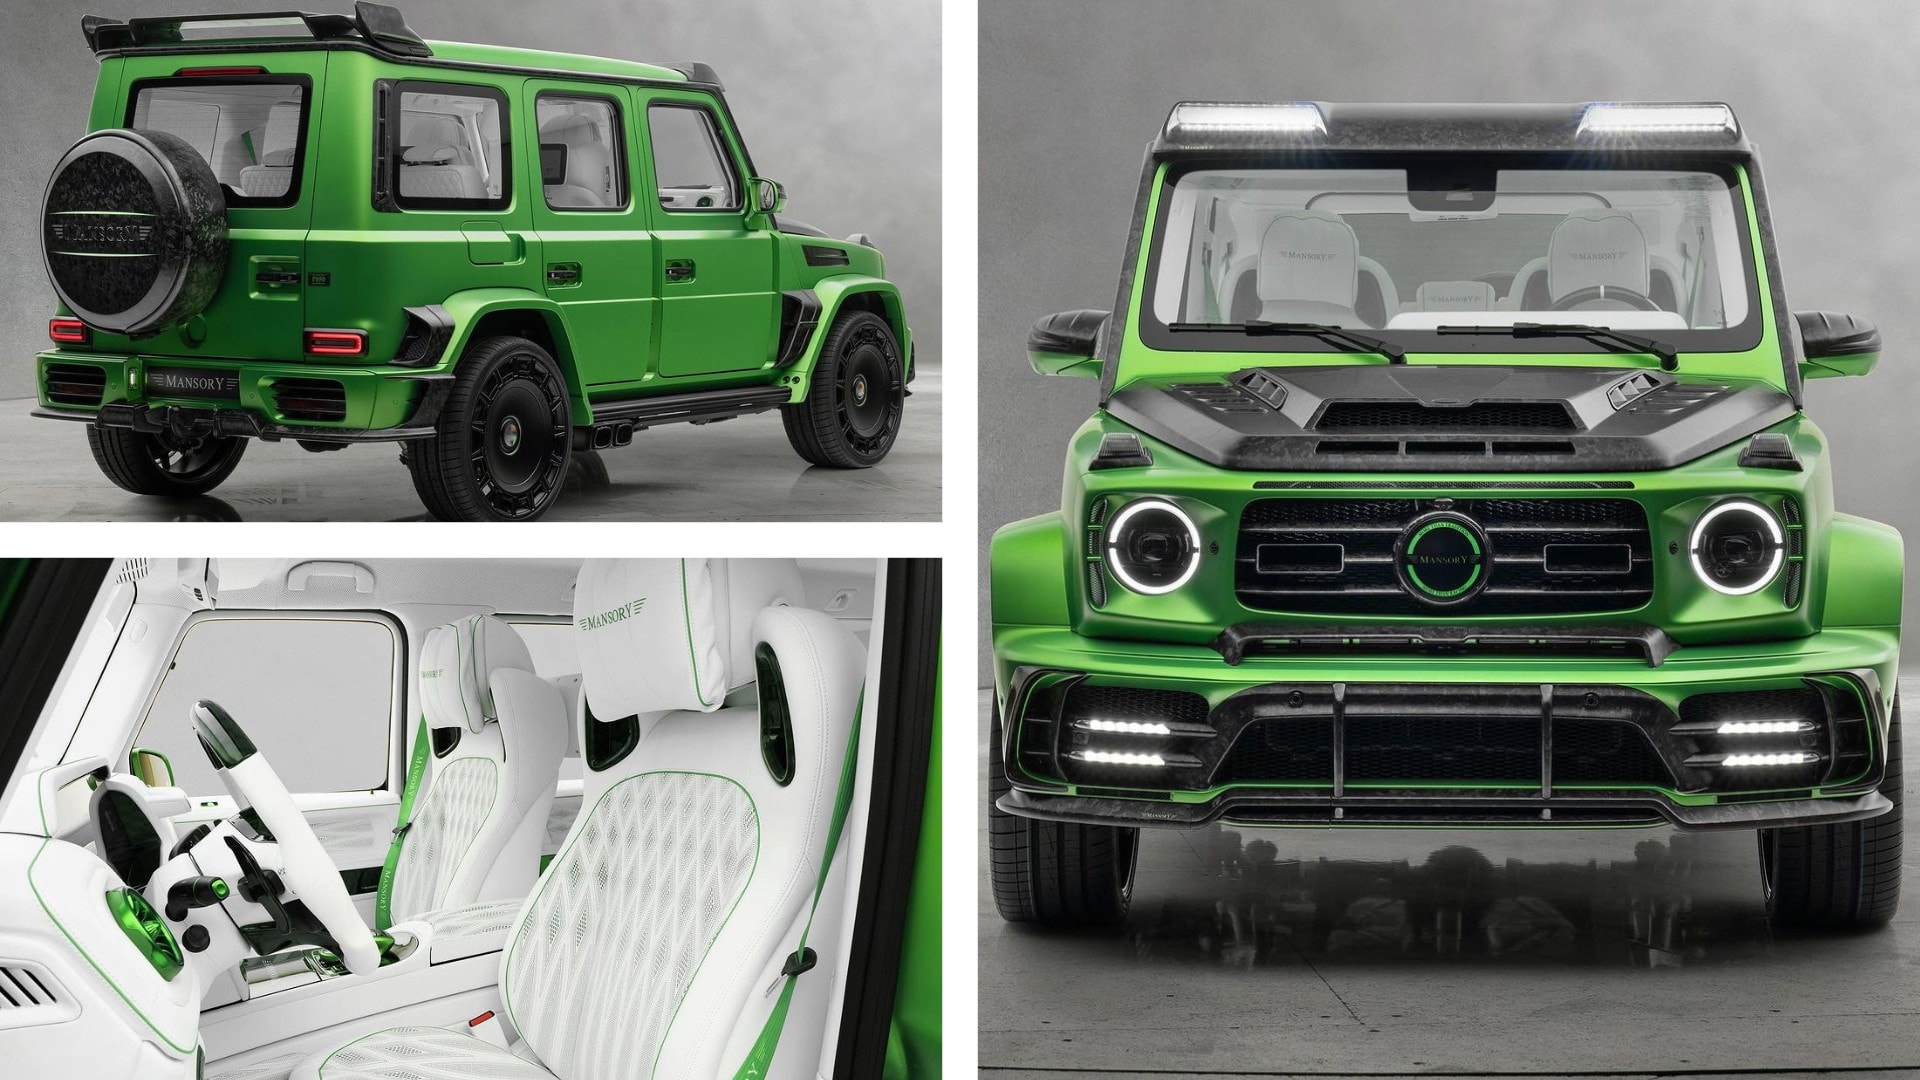 You See, Mercedes-Benz? This Is How To Do An Environmentally Friendly  G-Class